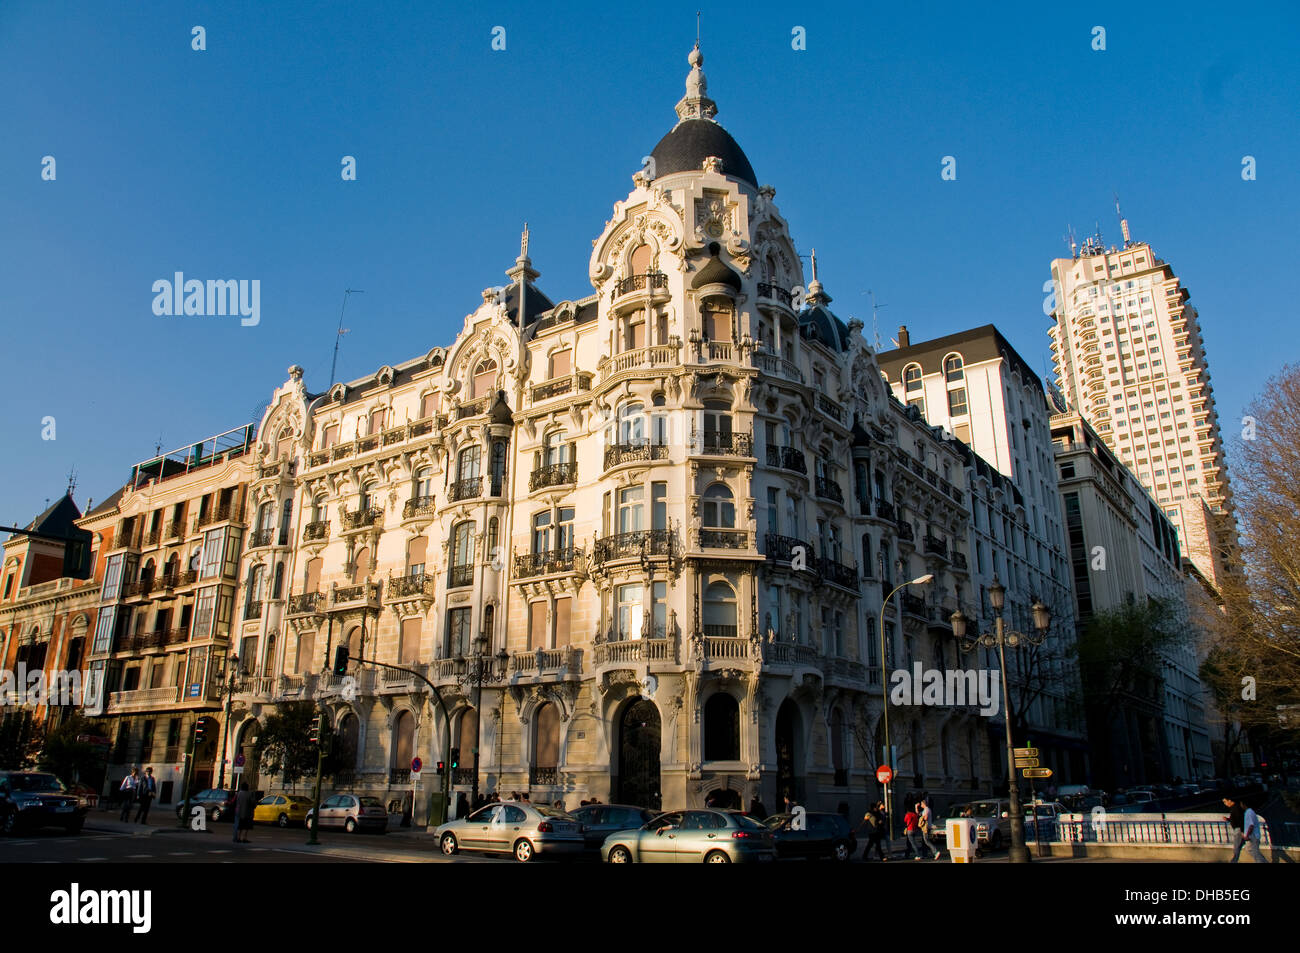 Casa Gallardo is a Building in Madrid, Spain. This is one of the key works of the last stage of modernism from Madrid. Stock Photo